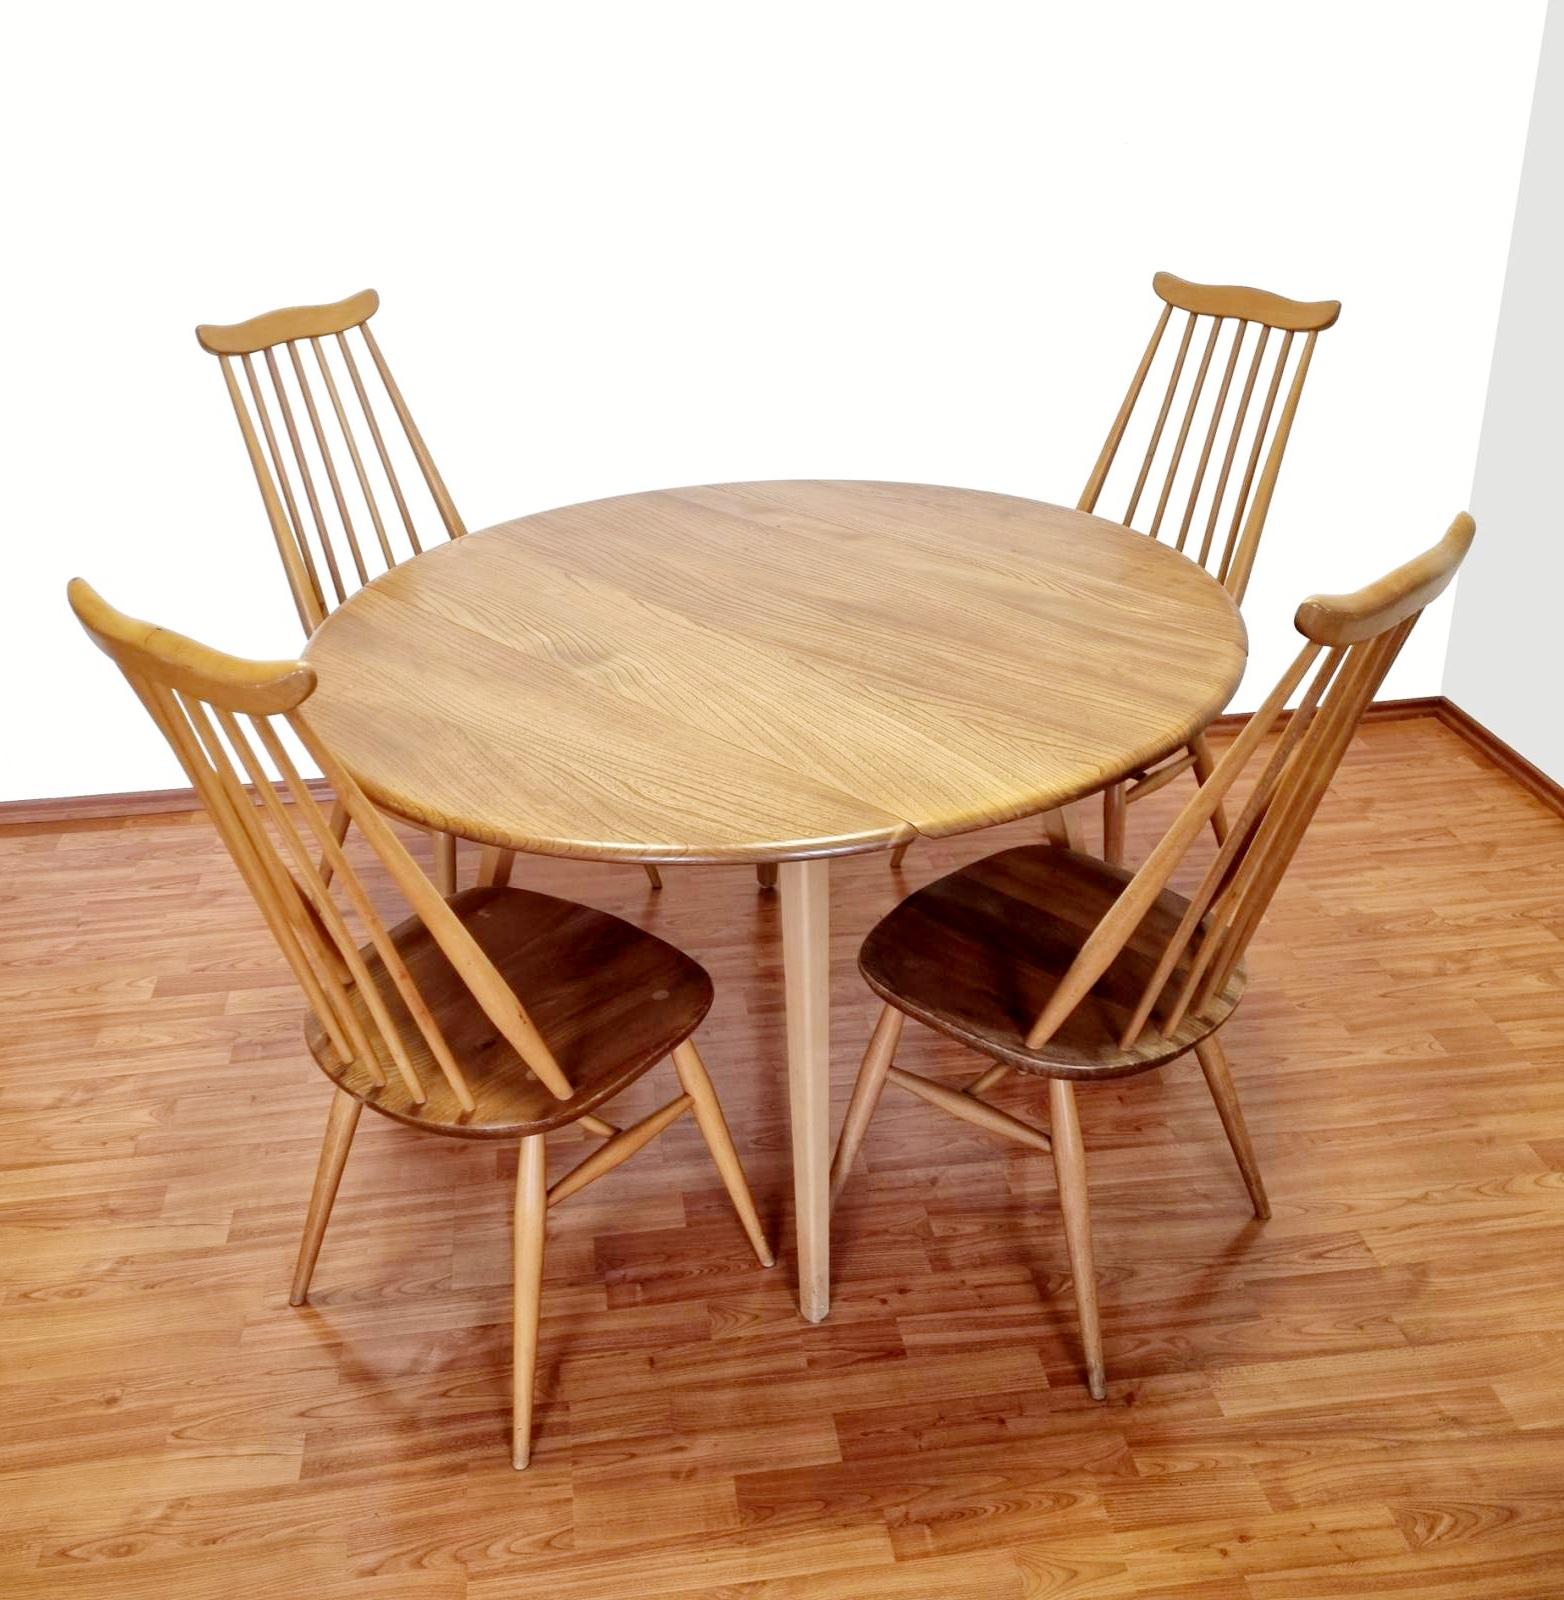 Nice Mid Century Ercol dining room set with drop leaf table and 4 model 369 Goldsmith chairs.
The set is in verry good condition.

Lenght 63 cm (closed leaves)
Lenght 124 cm (fully open).